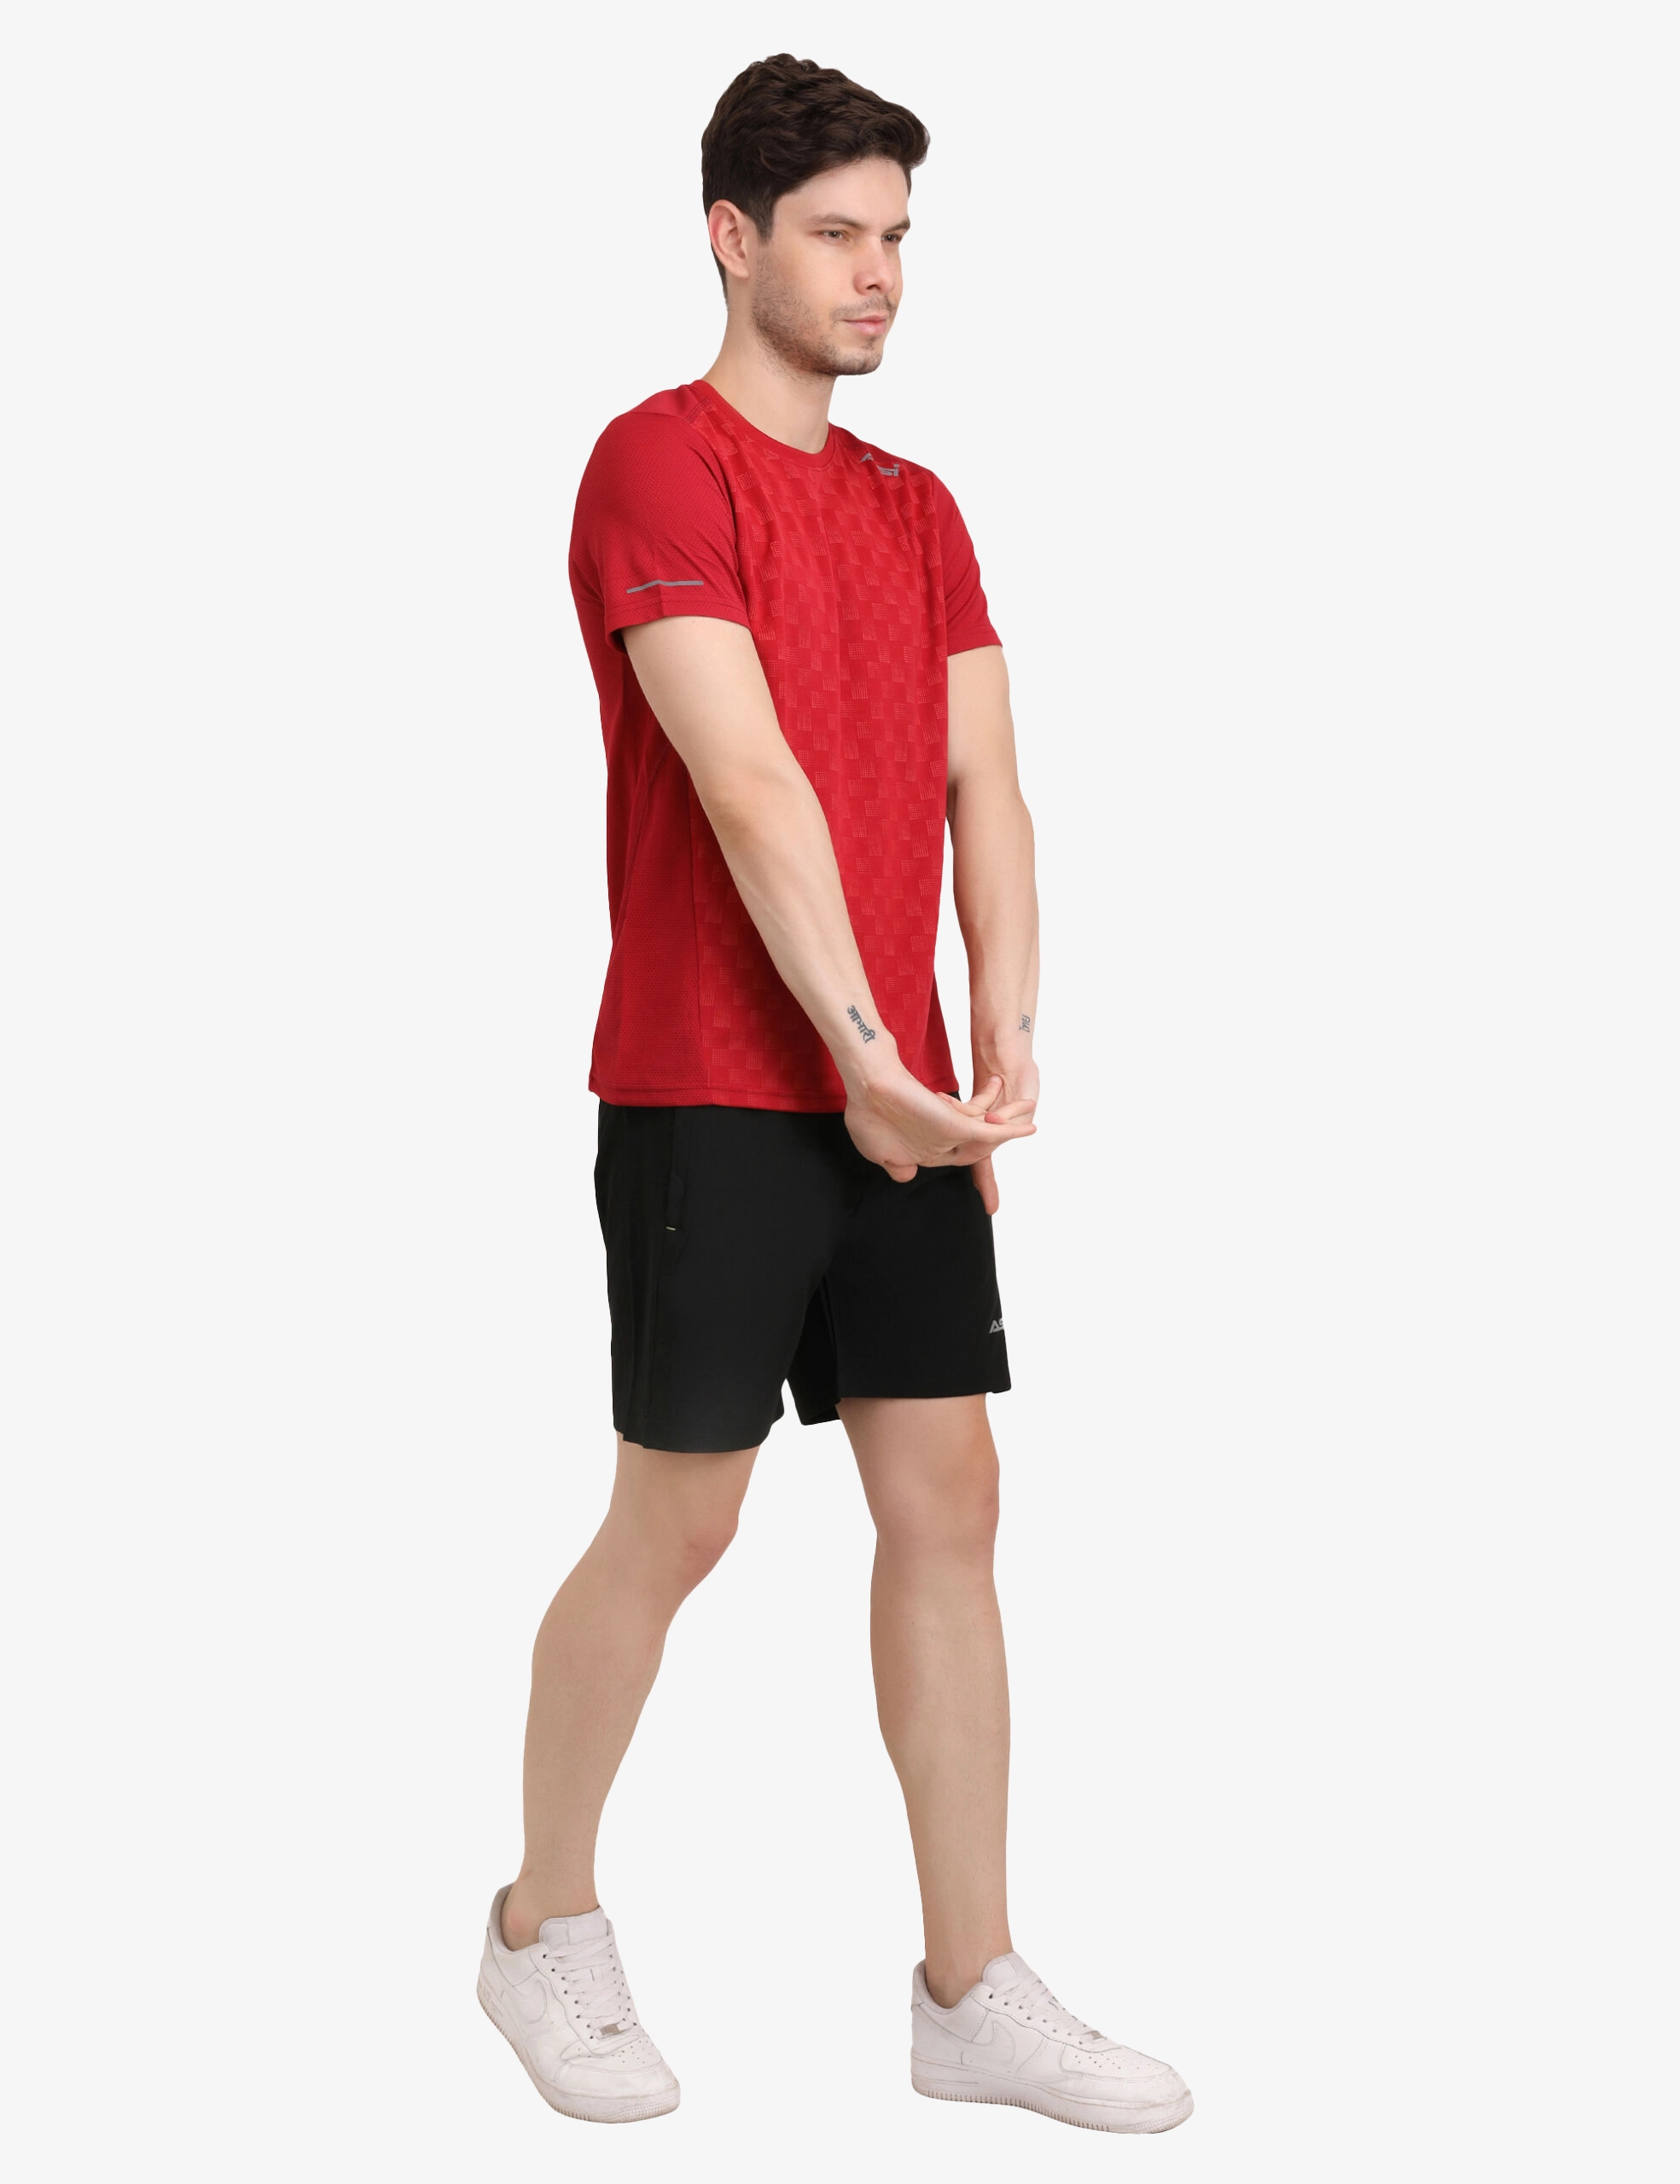 ASI Amaze Sports T-Shirt Red Color for Men